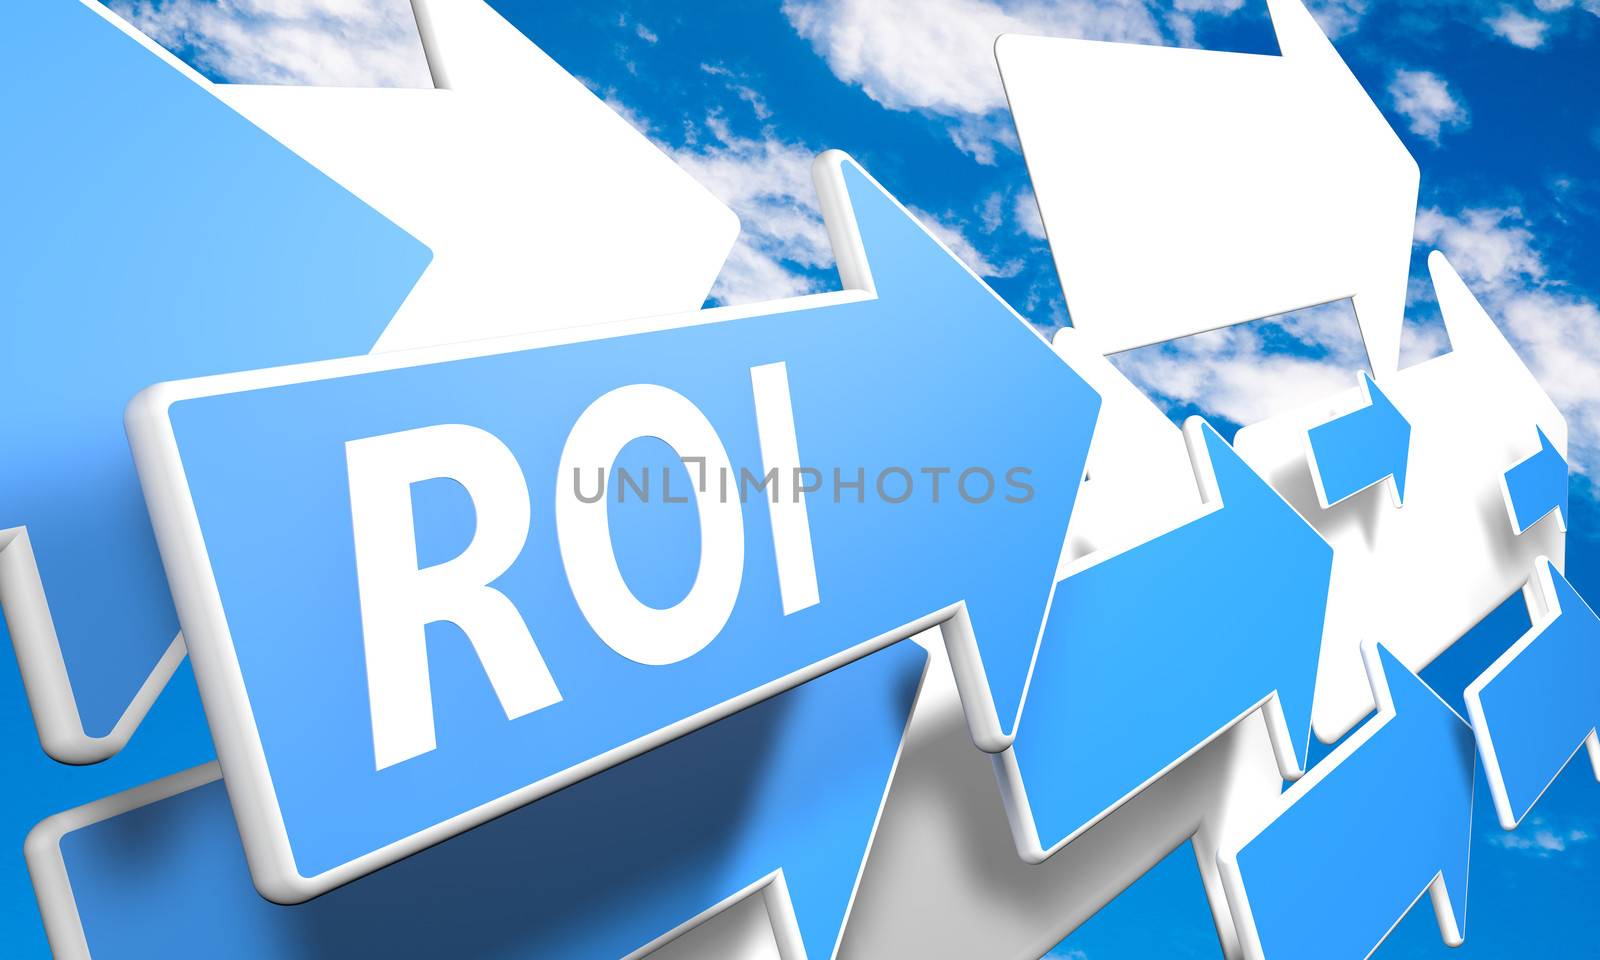 Return on Investment 3d render concept with blue and white arrows flying upwards in a blue sky with clouds